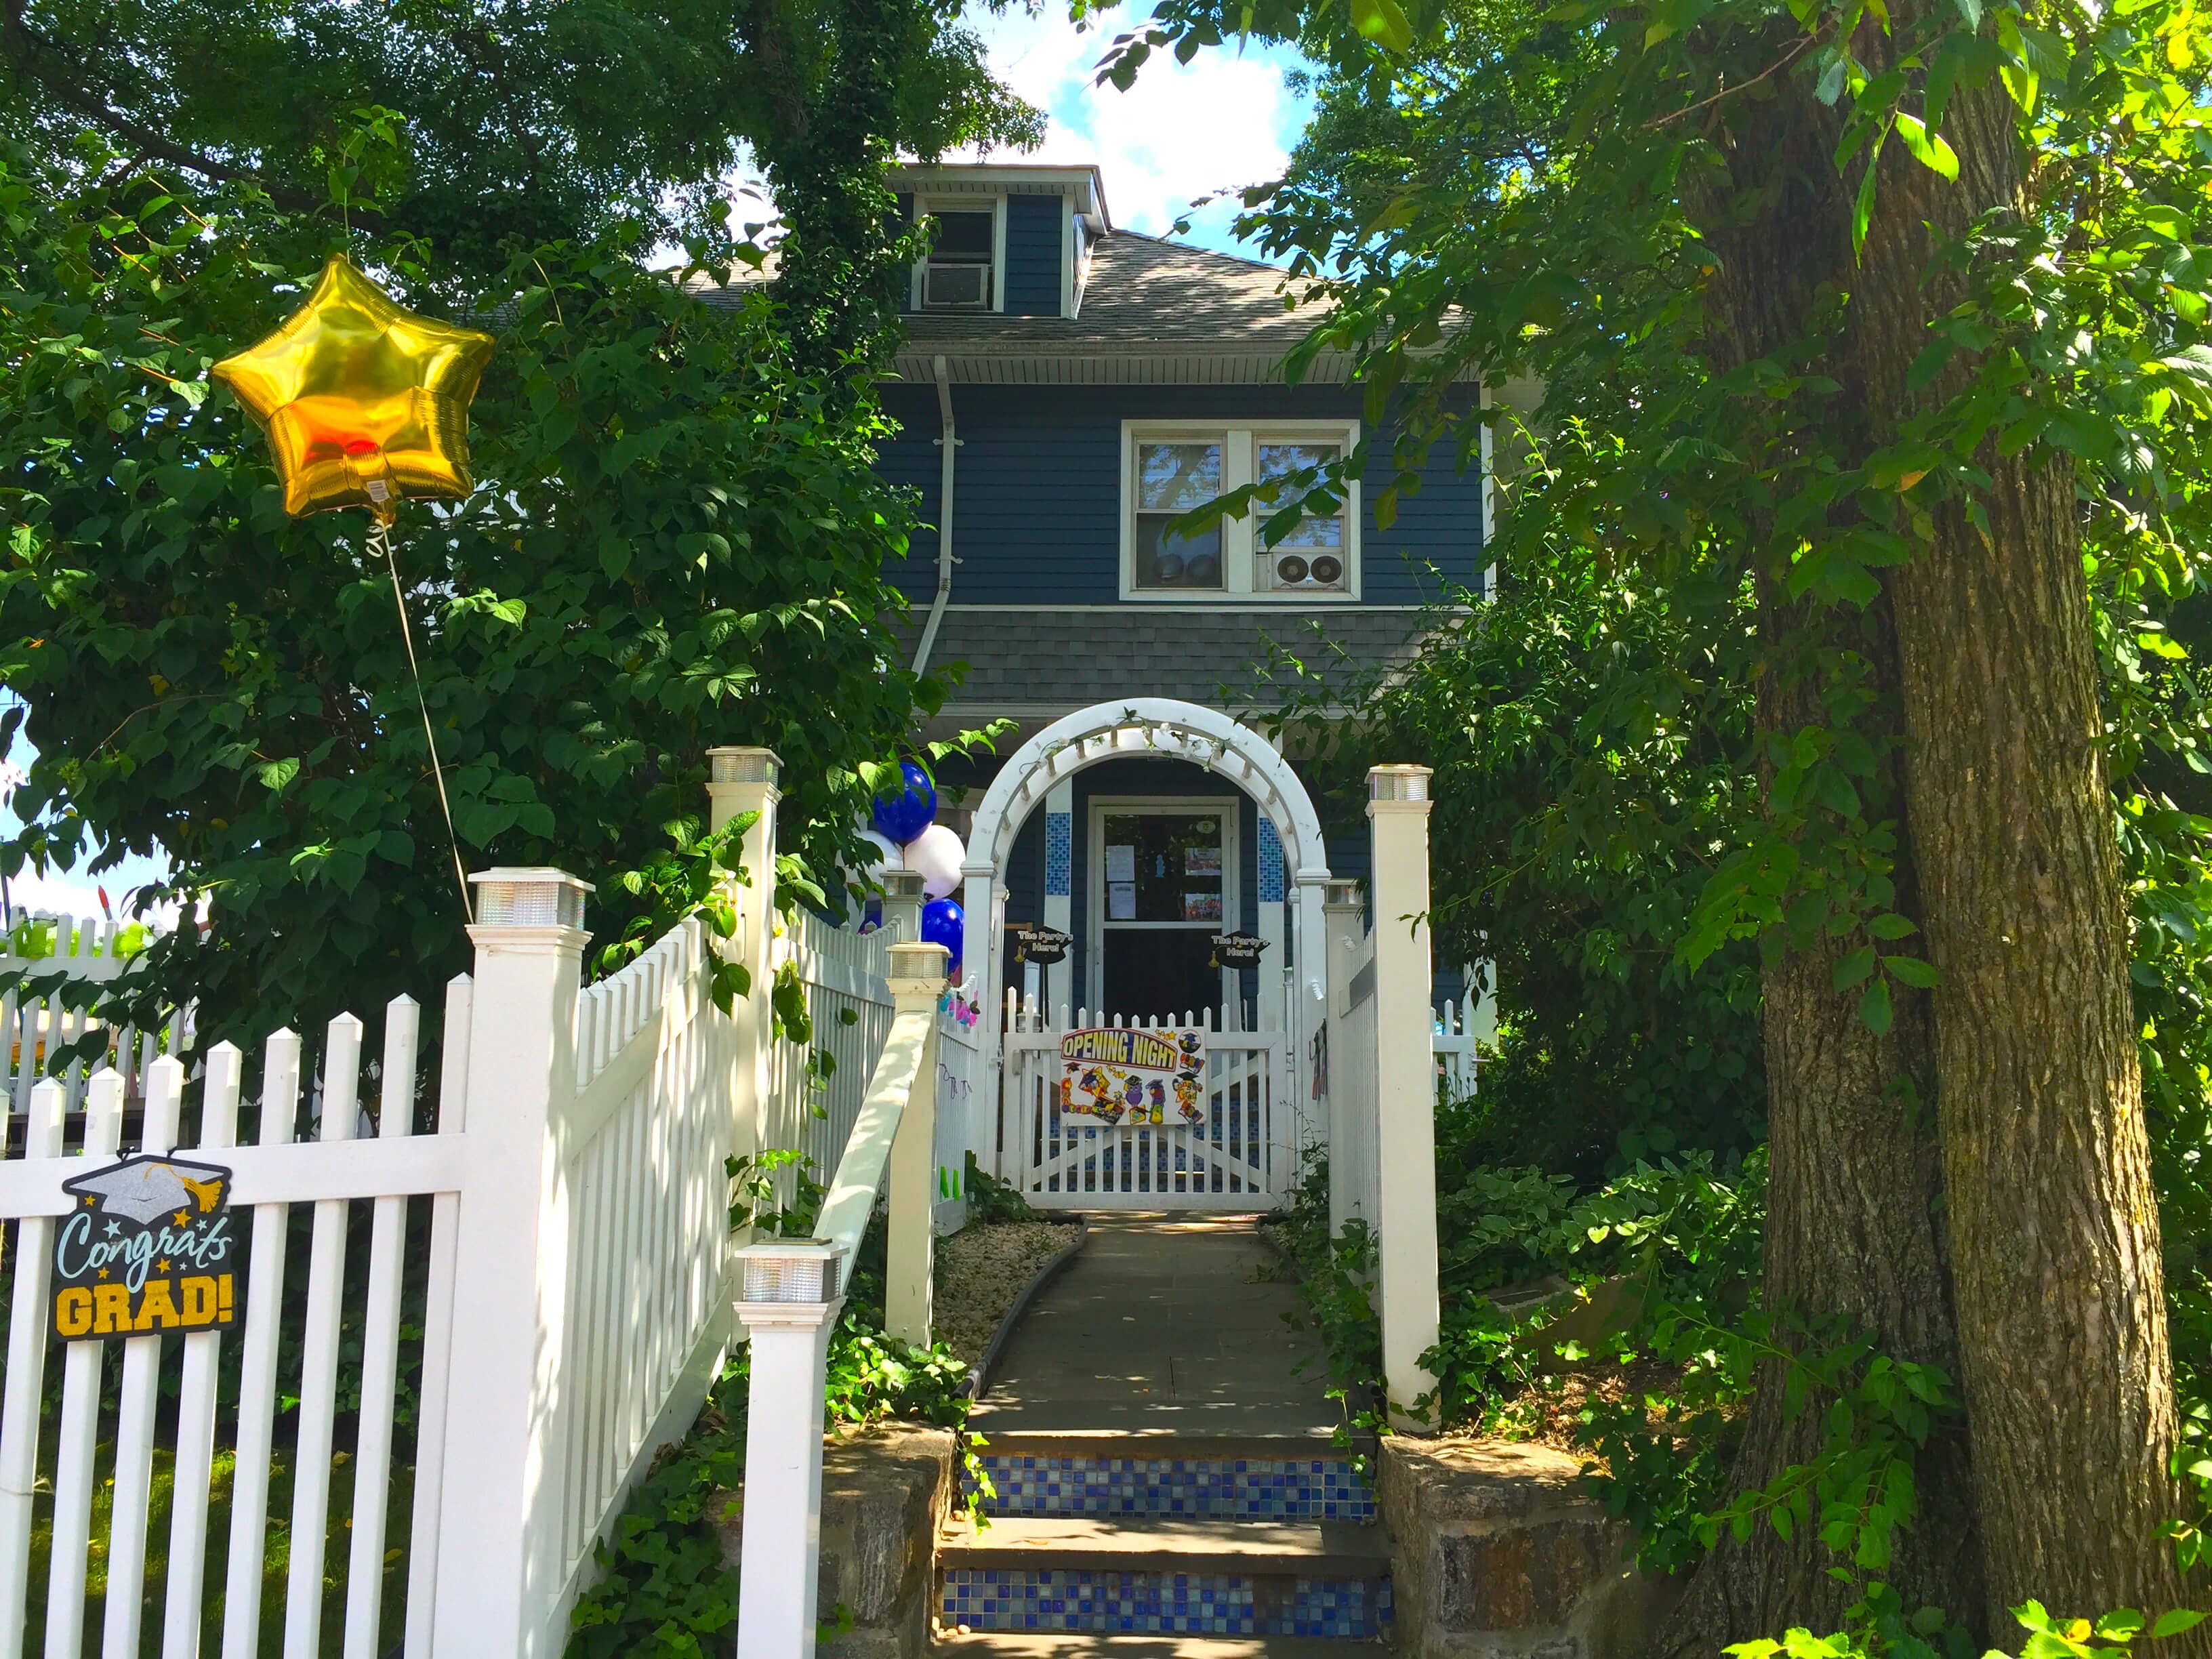 An Exterior shot of a blue house surrounded by green vegetation. There is a balloon in the shape of a golden star tied to the white fence in front of the house.